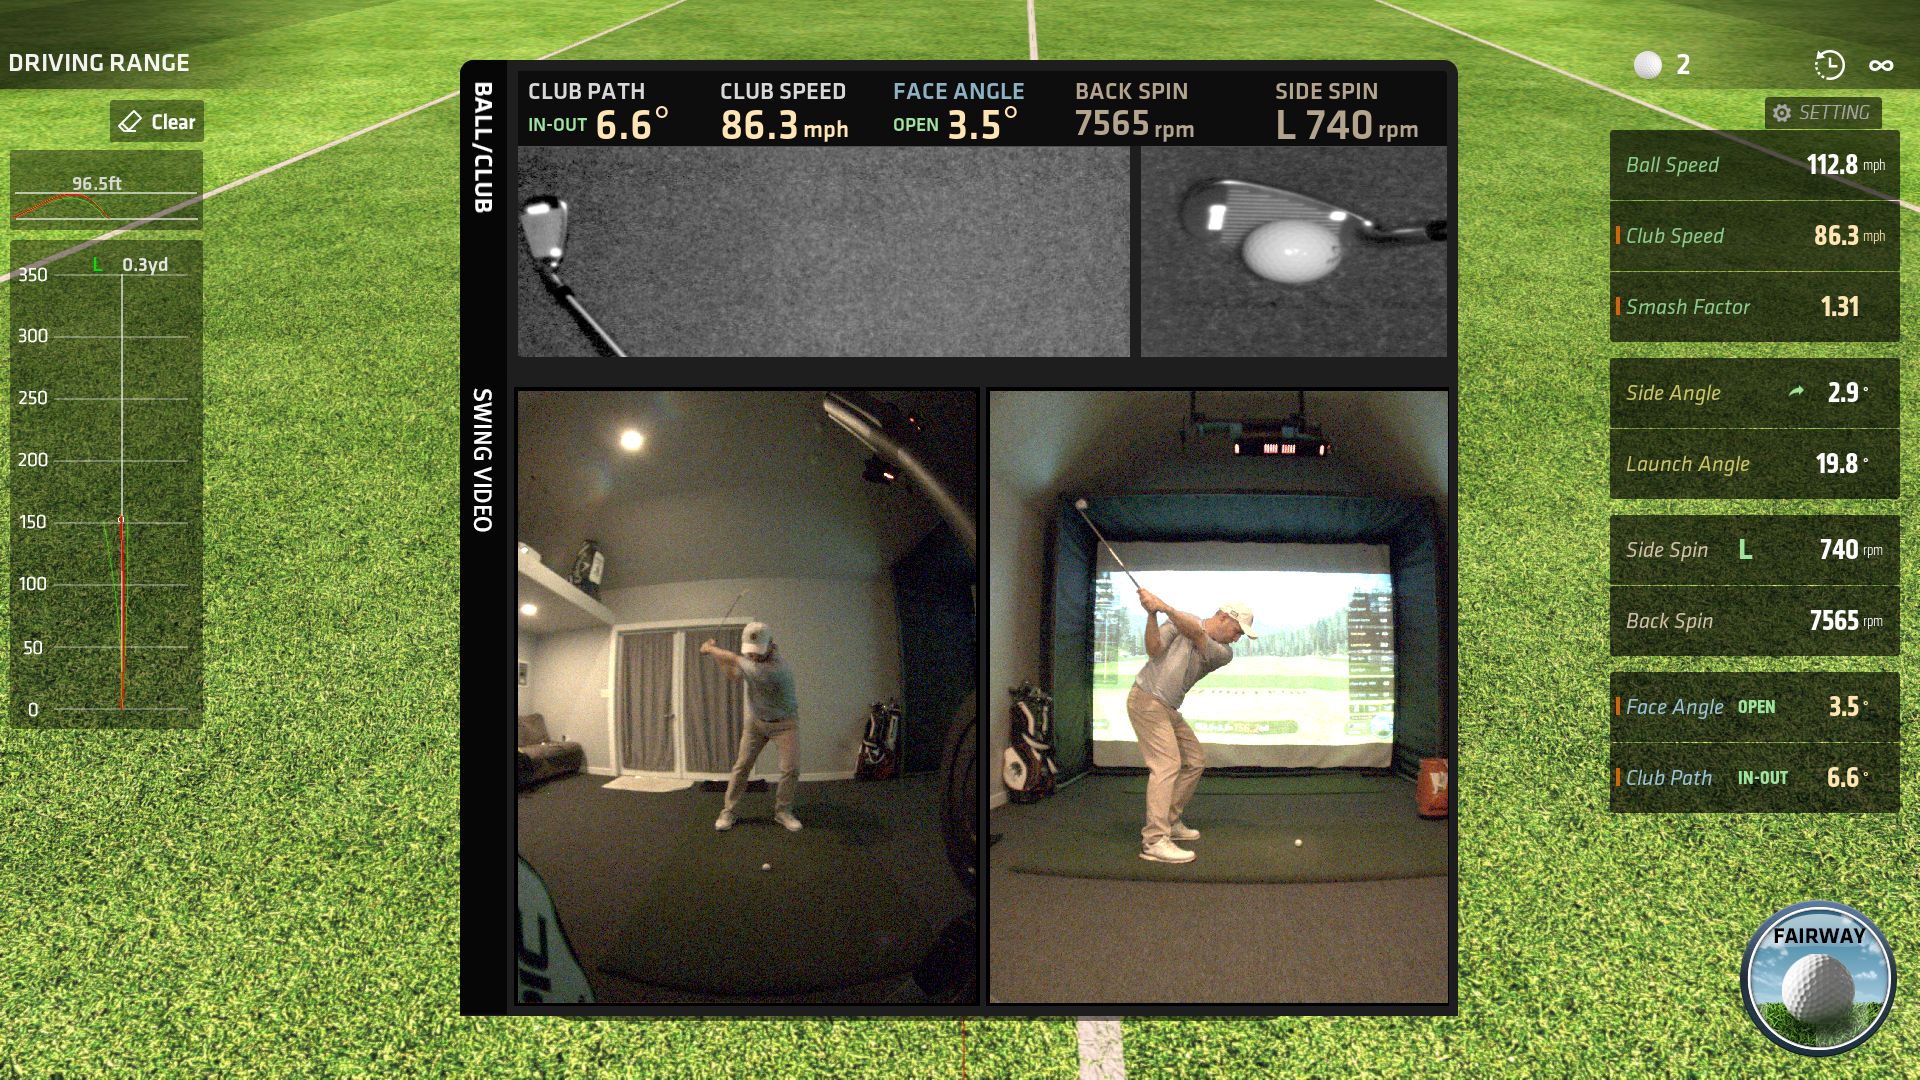 Uneekor Refine Swing Analysis and Club Data after balls hit 2.png